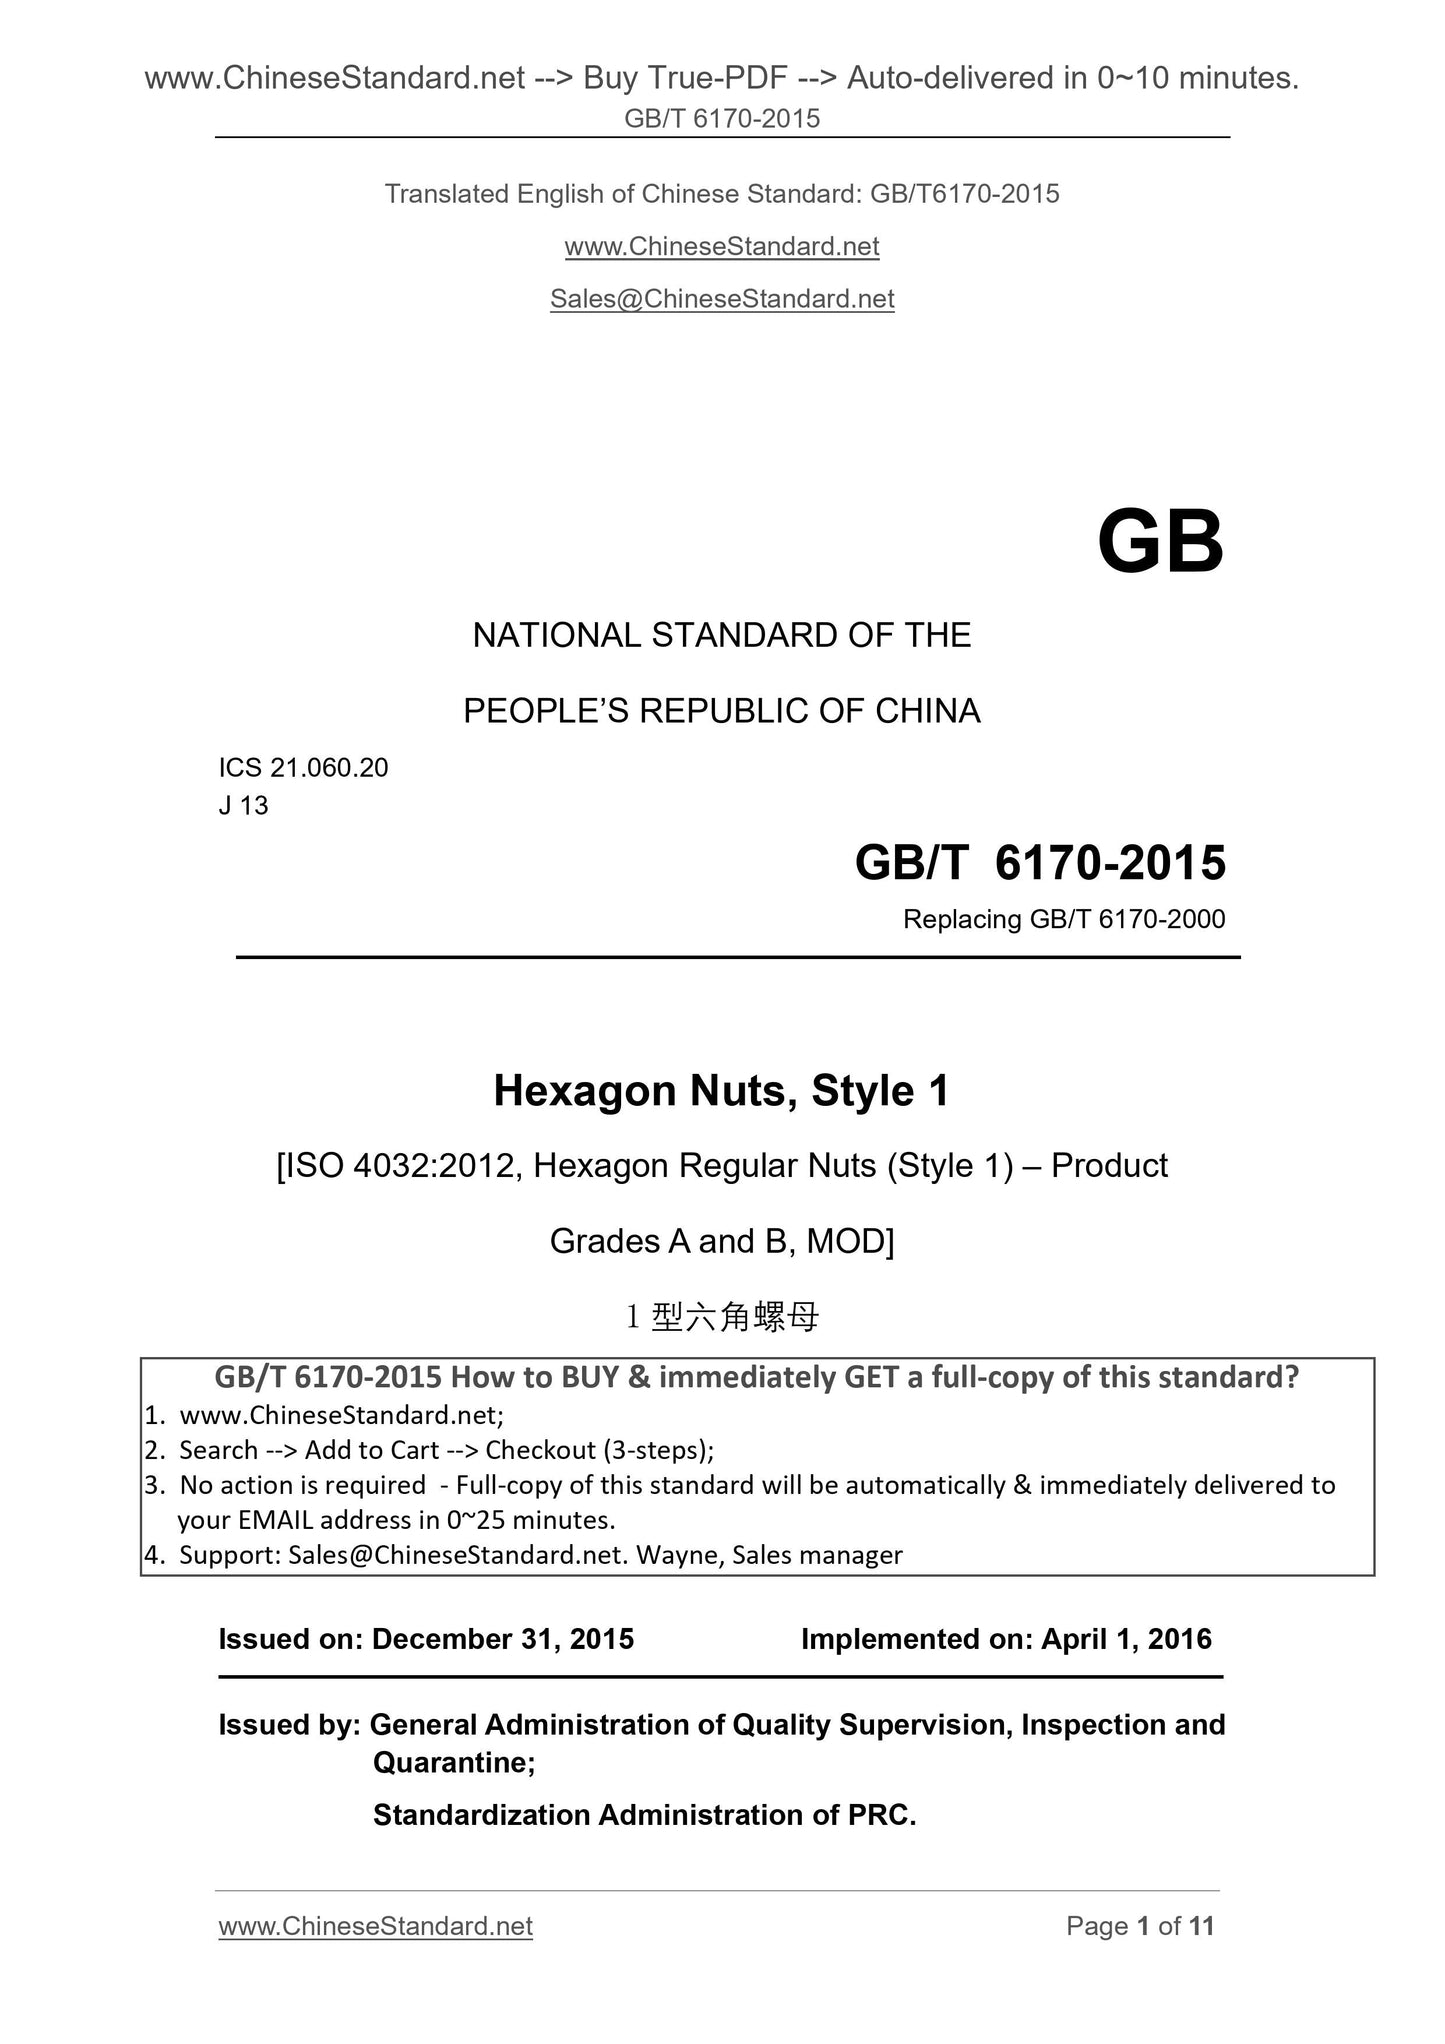 GB/T 6170-2015 Page 1